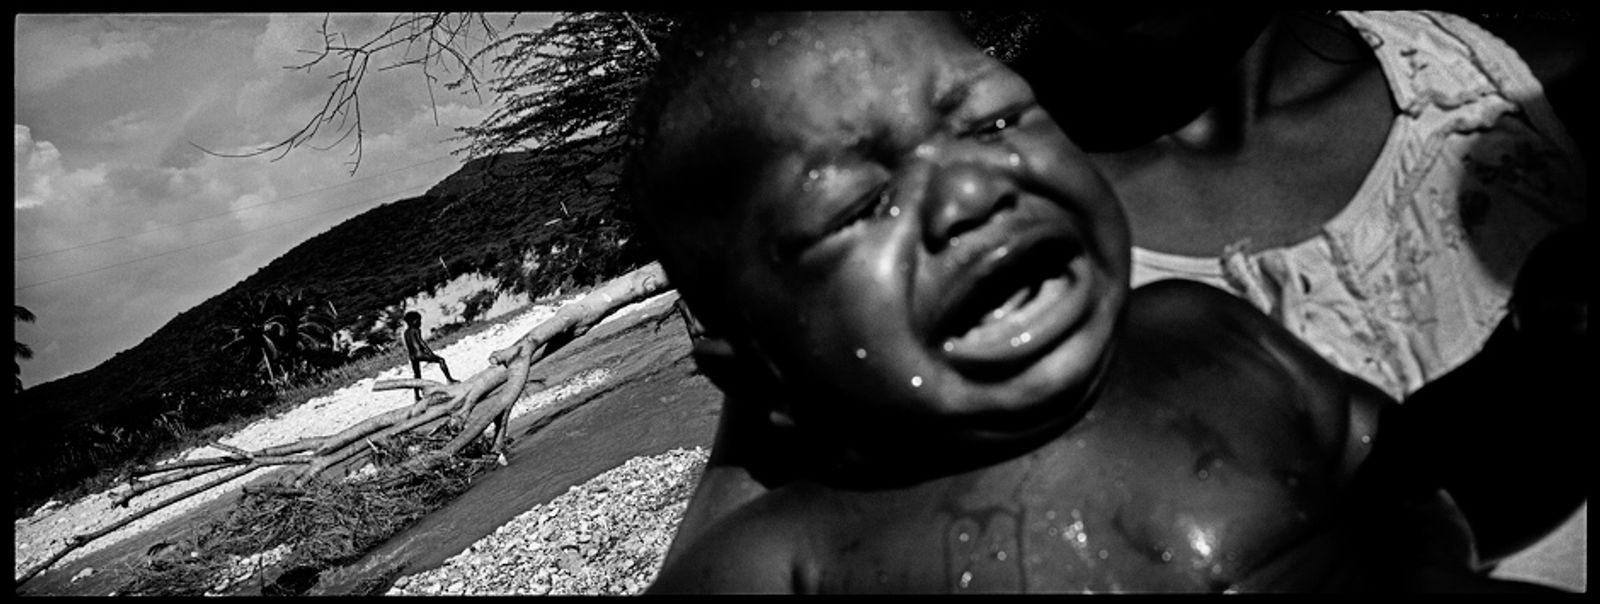 © Benjamin Rusnak - A baby cries after his daily bath in a river along the border of Haiti and the Dominican Republic.